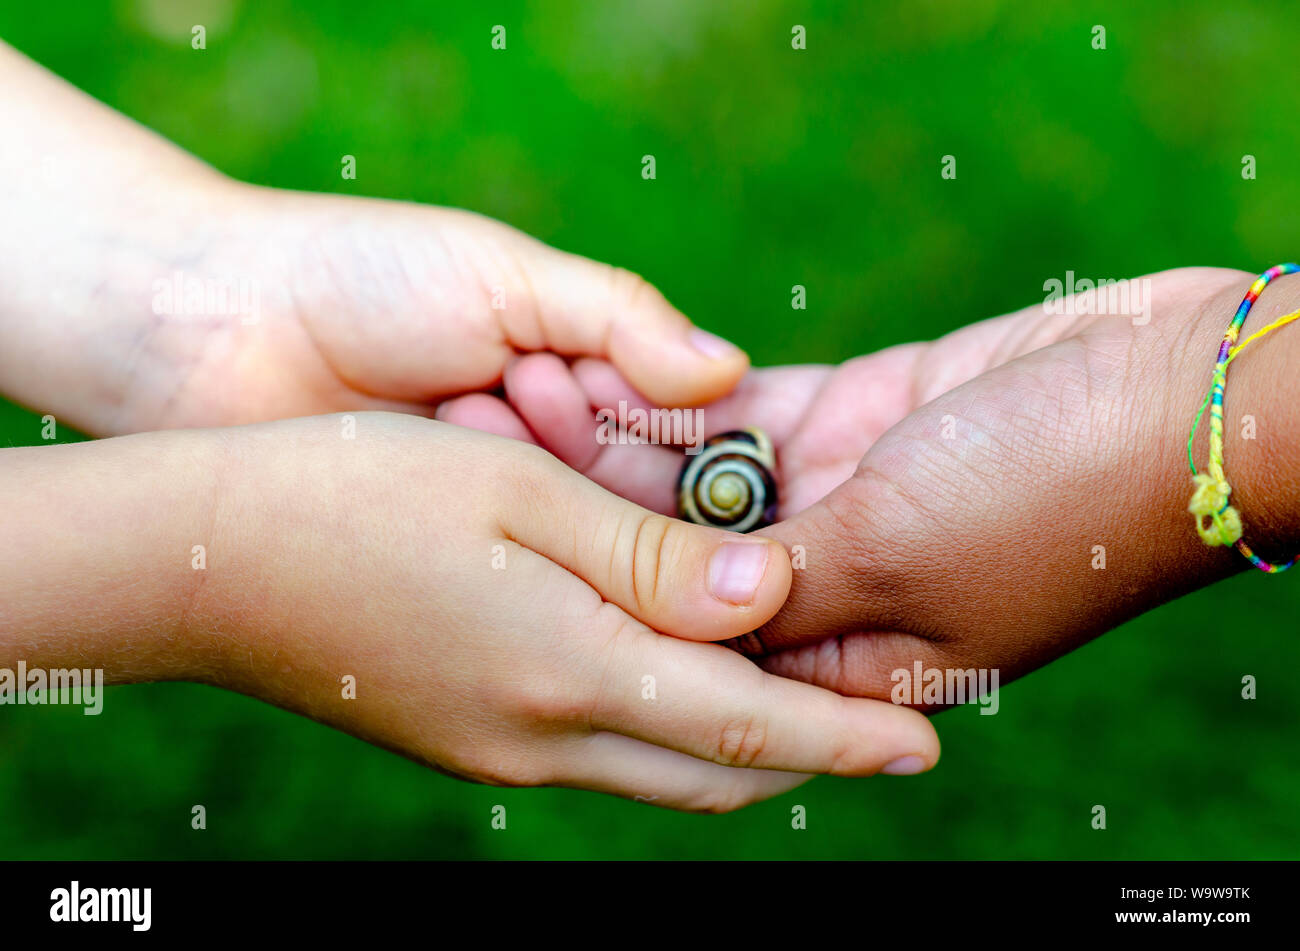 Boy and girl of different races hold an alive snail in their hands. Boy is Caucasian and the girl is black.Conceptual photo about care and diversity. Stock Photo